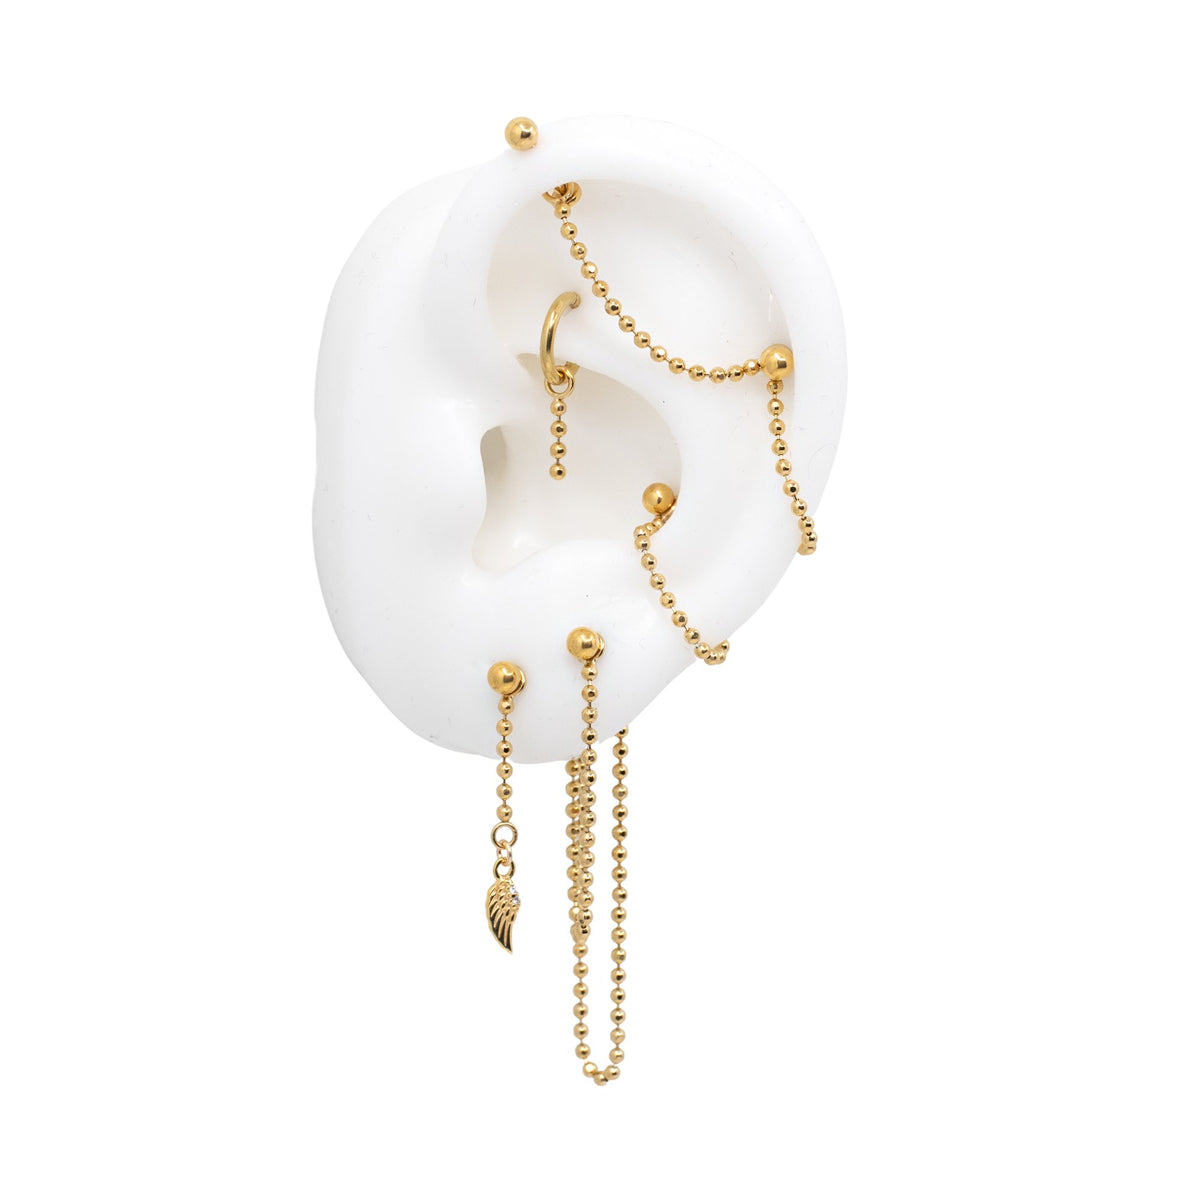 Yellow Gold Charms Gold Ball Chain Charm The Curated Lobe